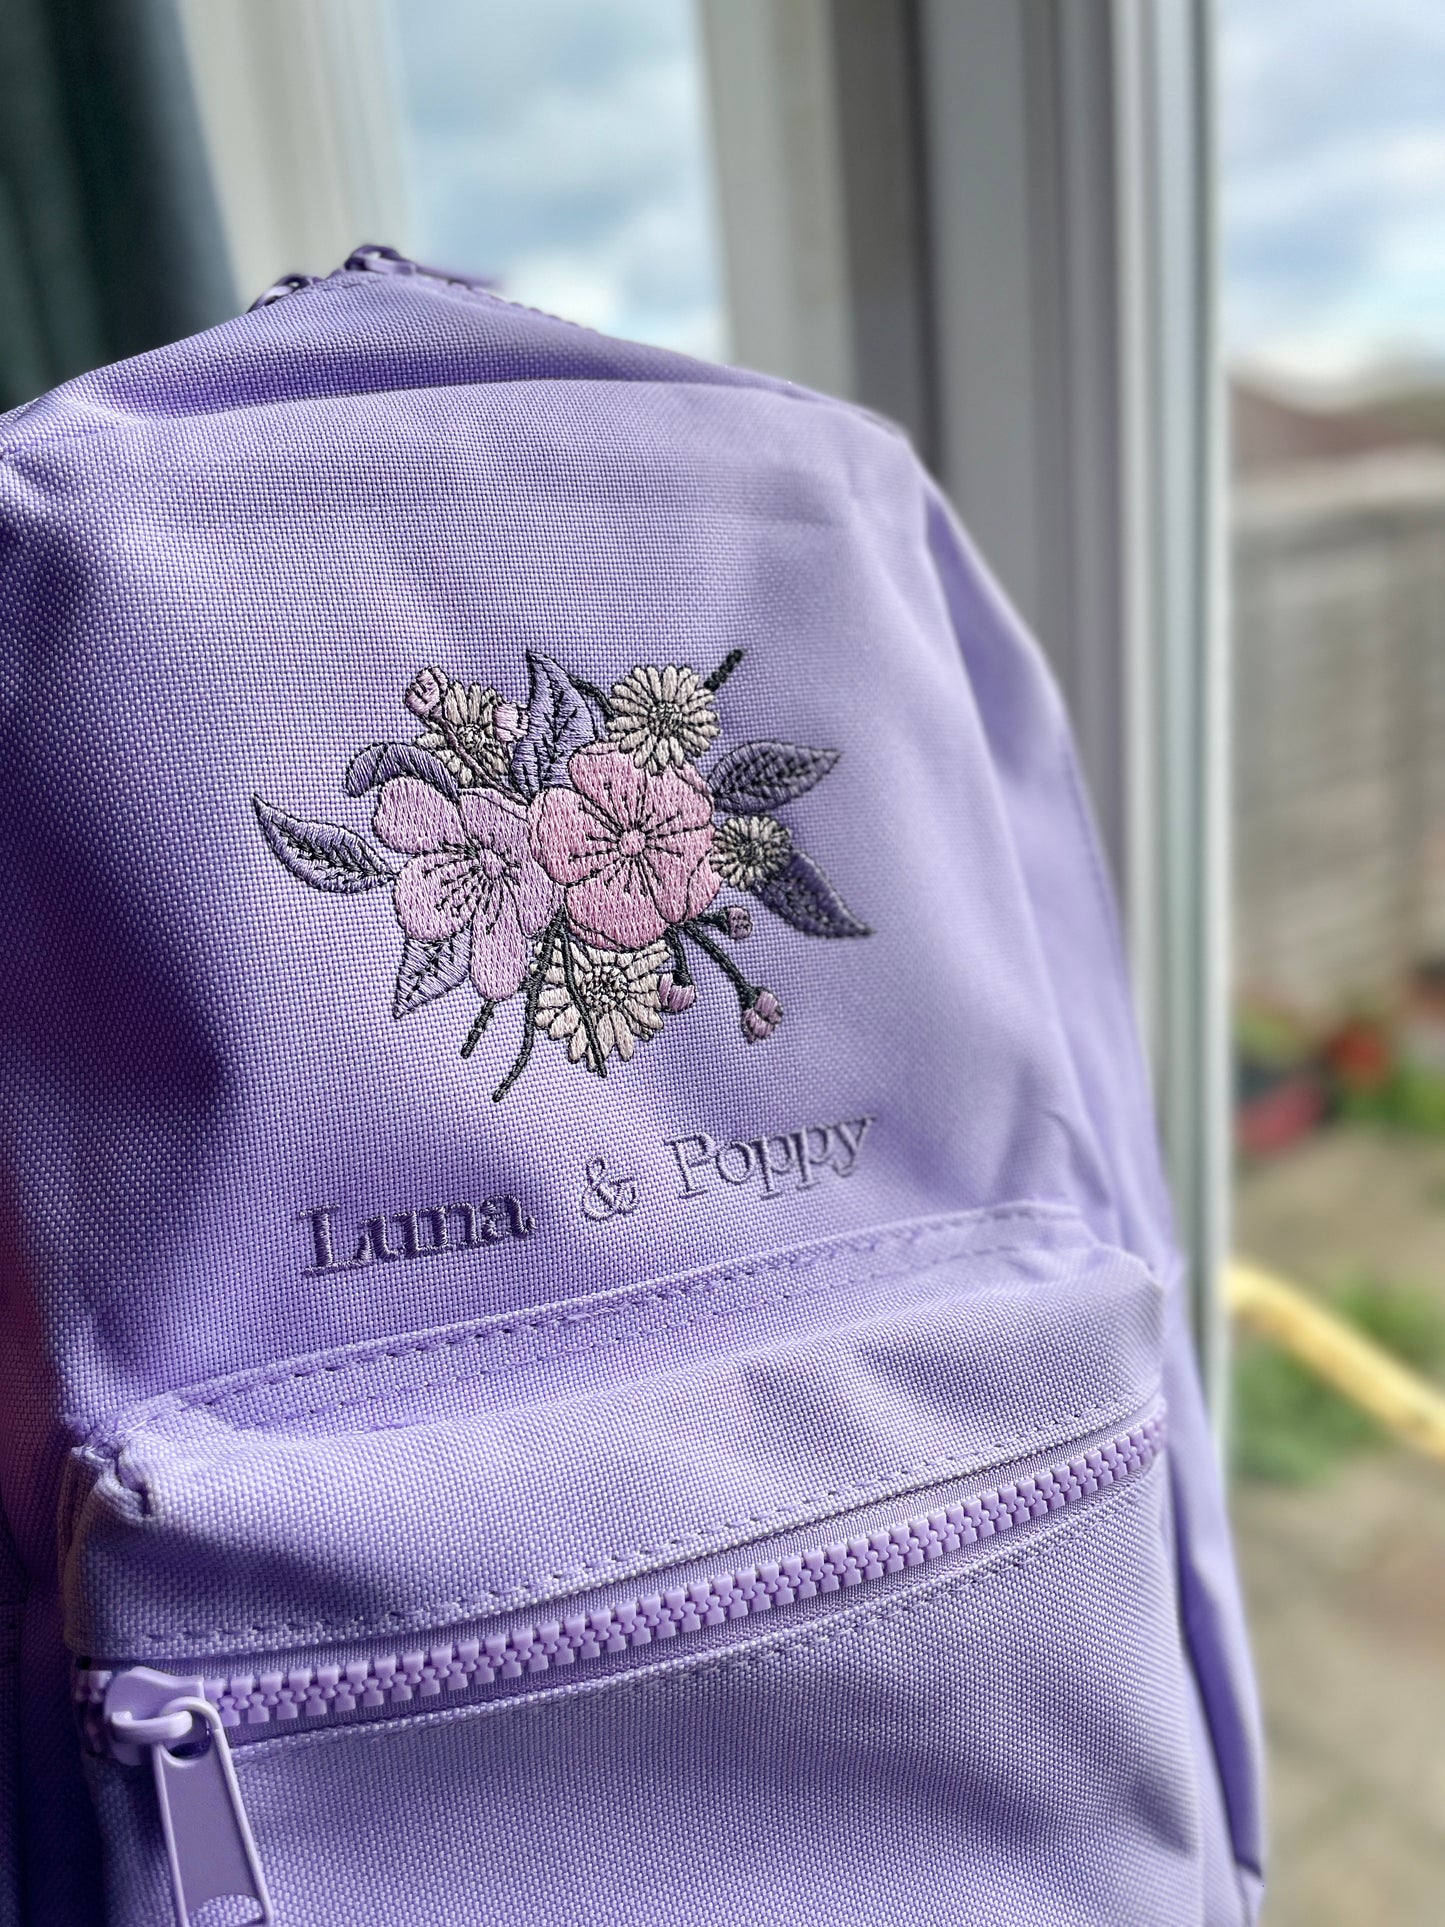 Embroidered Mini Backpack - 'I Can Buy Myself Flowers'